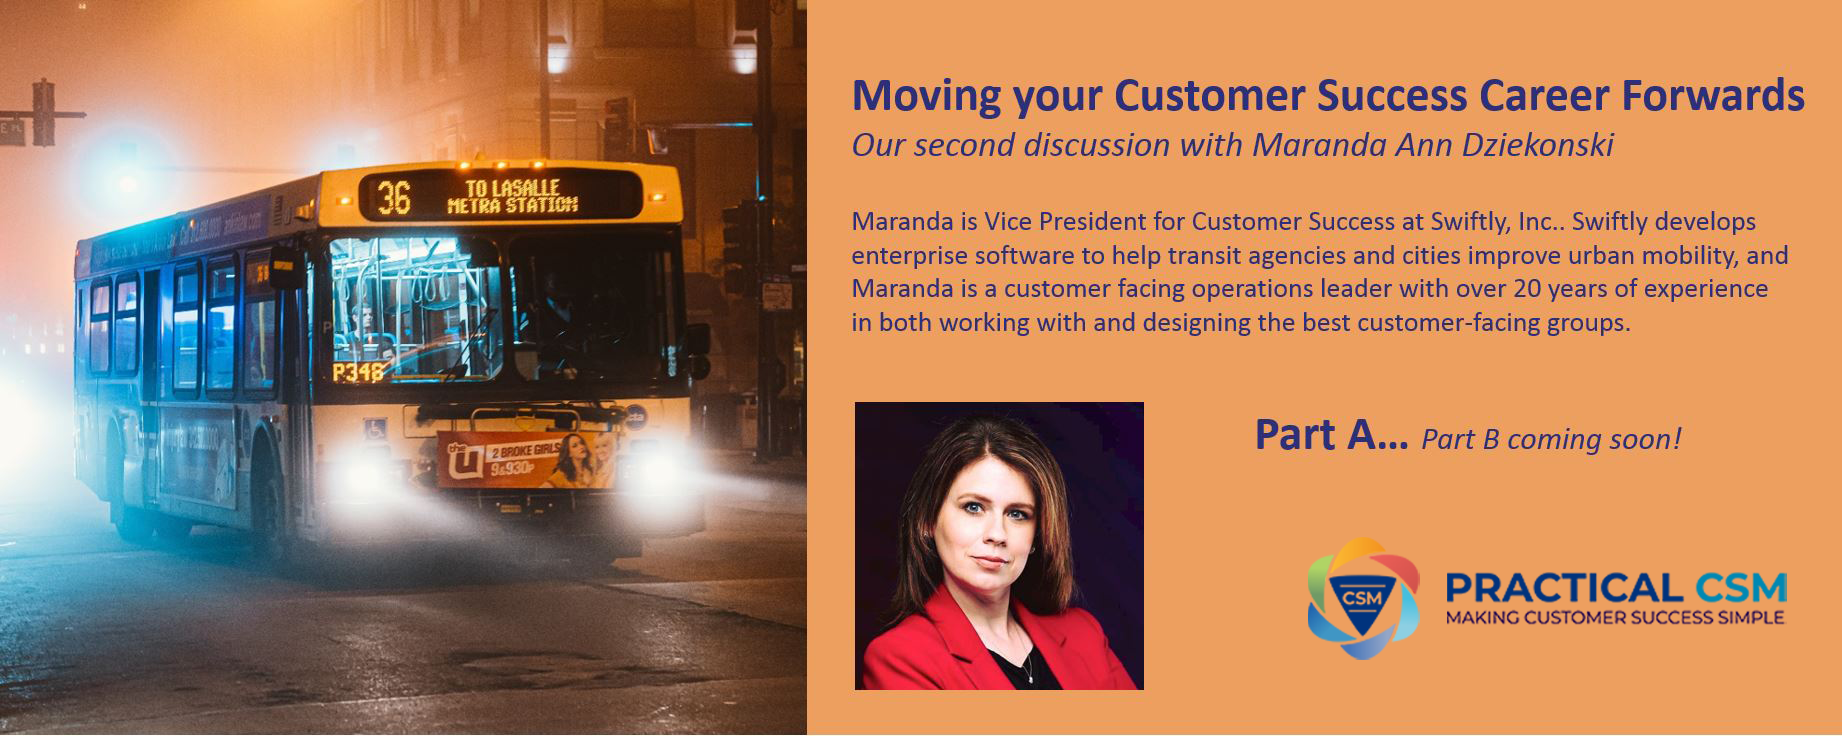 Moving Your Customer Success Career Forwards - Part A (Audio)- Practical CSM